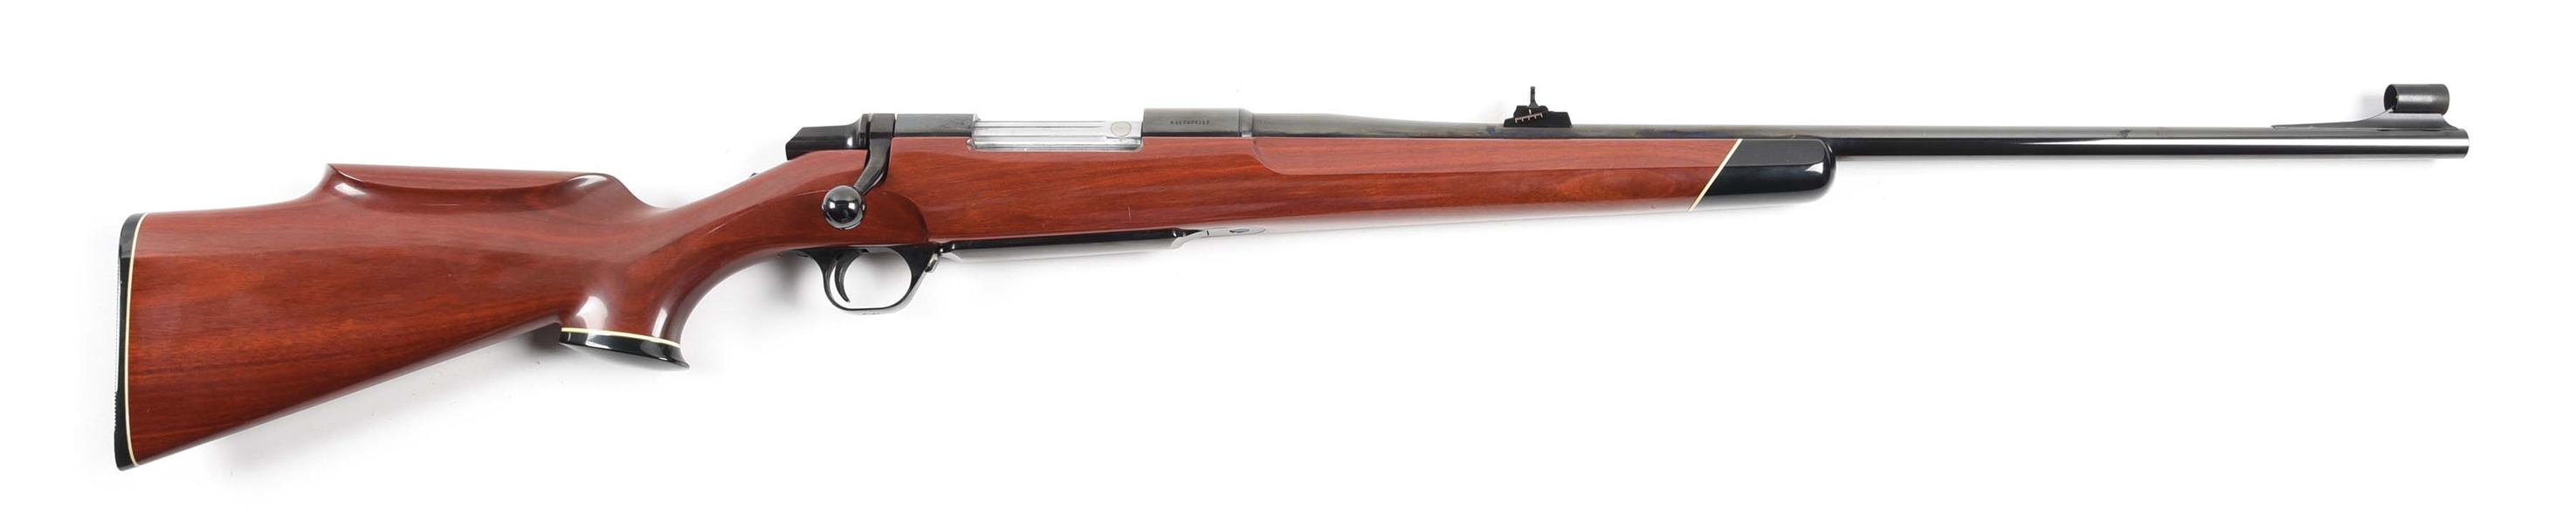 (M) BROWNING BBR BOLT ACTION RIFLE WITH BLOOD WOOD STOCK.